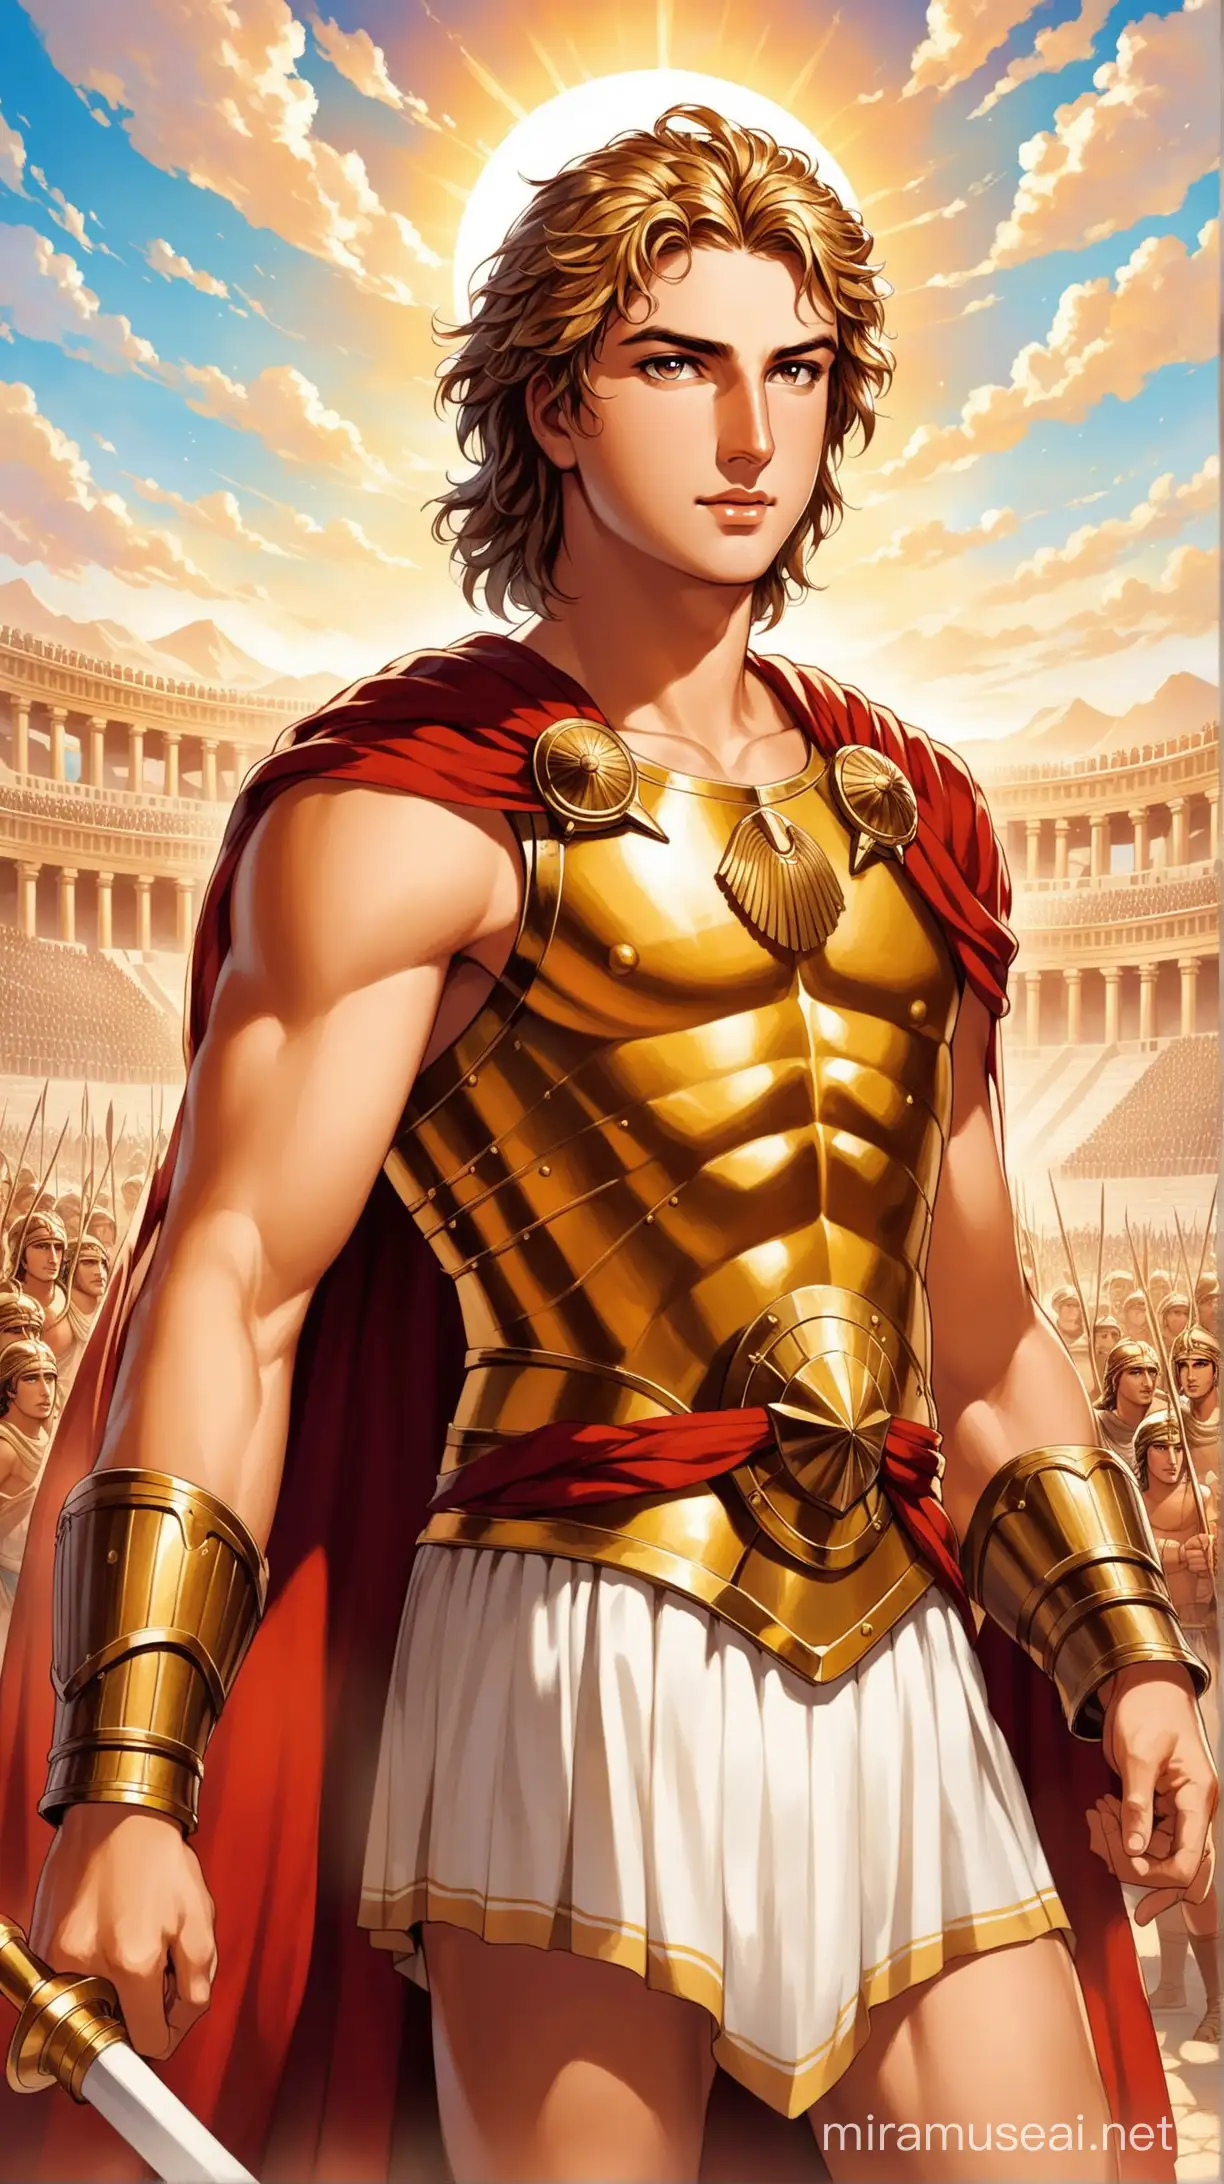 Alexander the Great, born in 356 BC, was a Macedonian king and one of history's greatest military minds. From a young age, he dreamed of conquest.